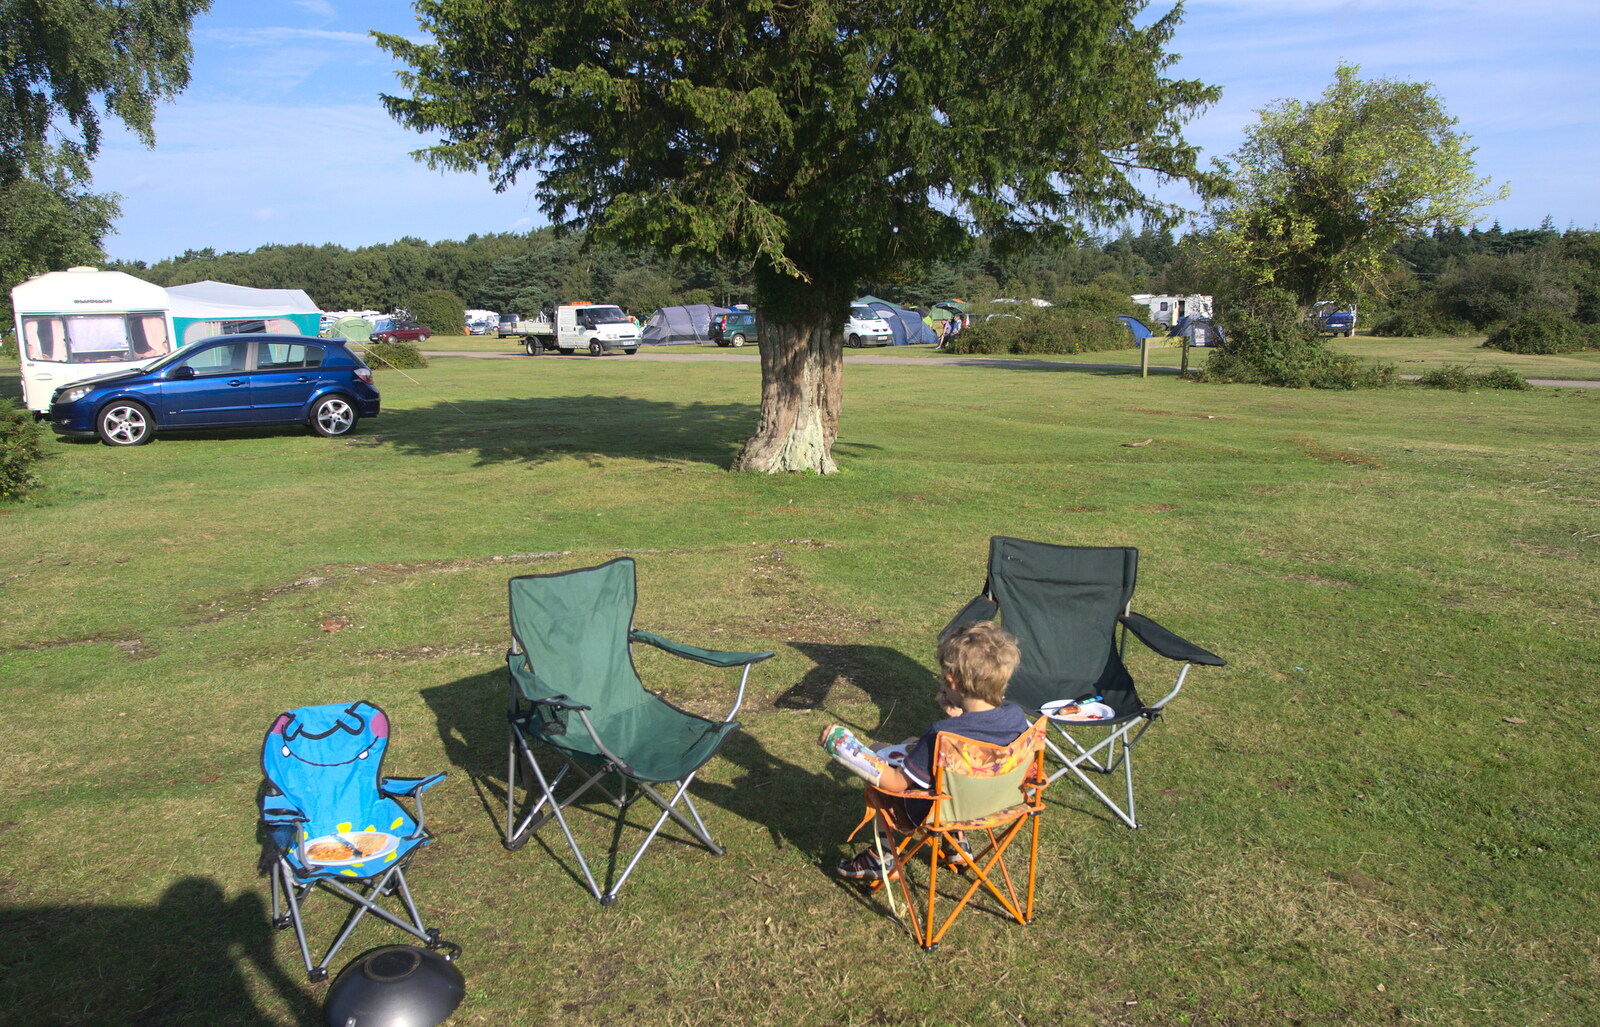 At the campsite from A Trip to Hurst Castle, Keyhaven, Hampshire - 28th August 2015